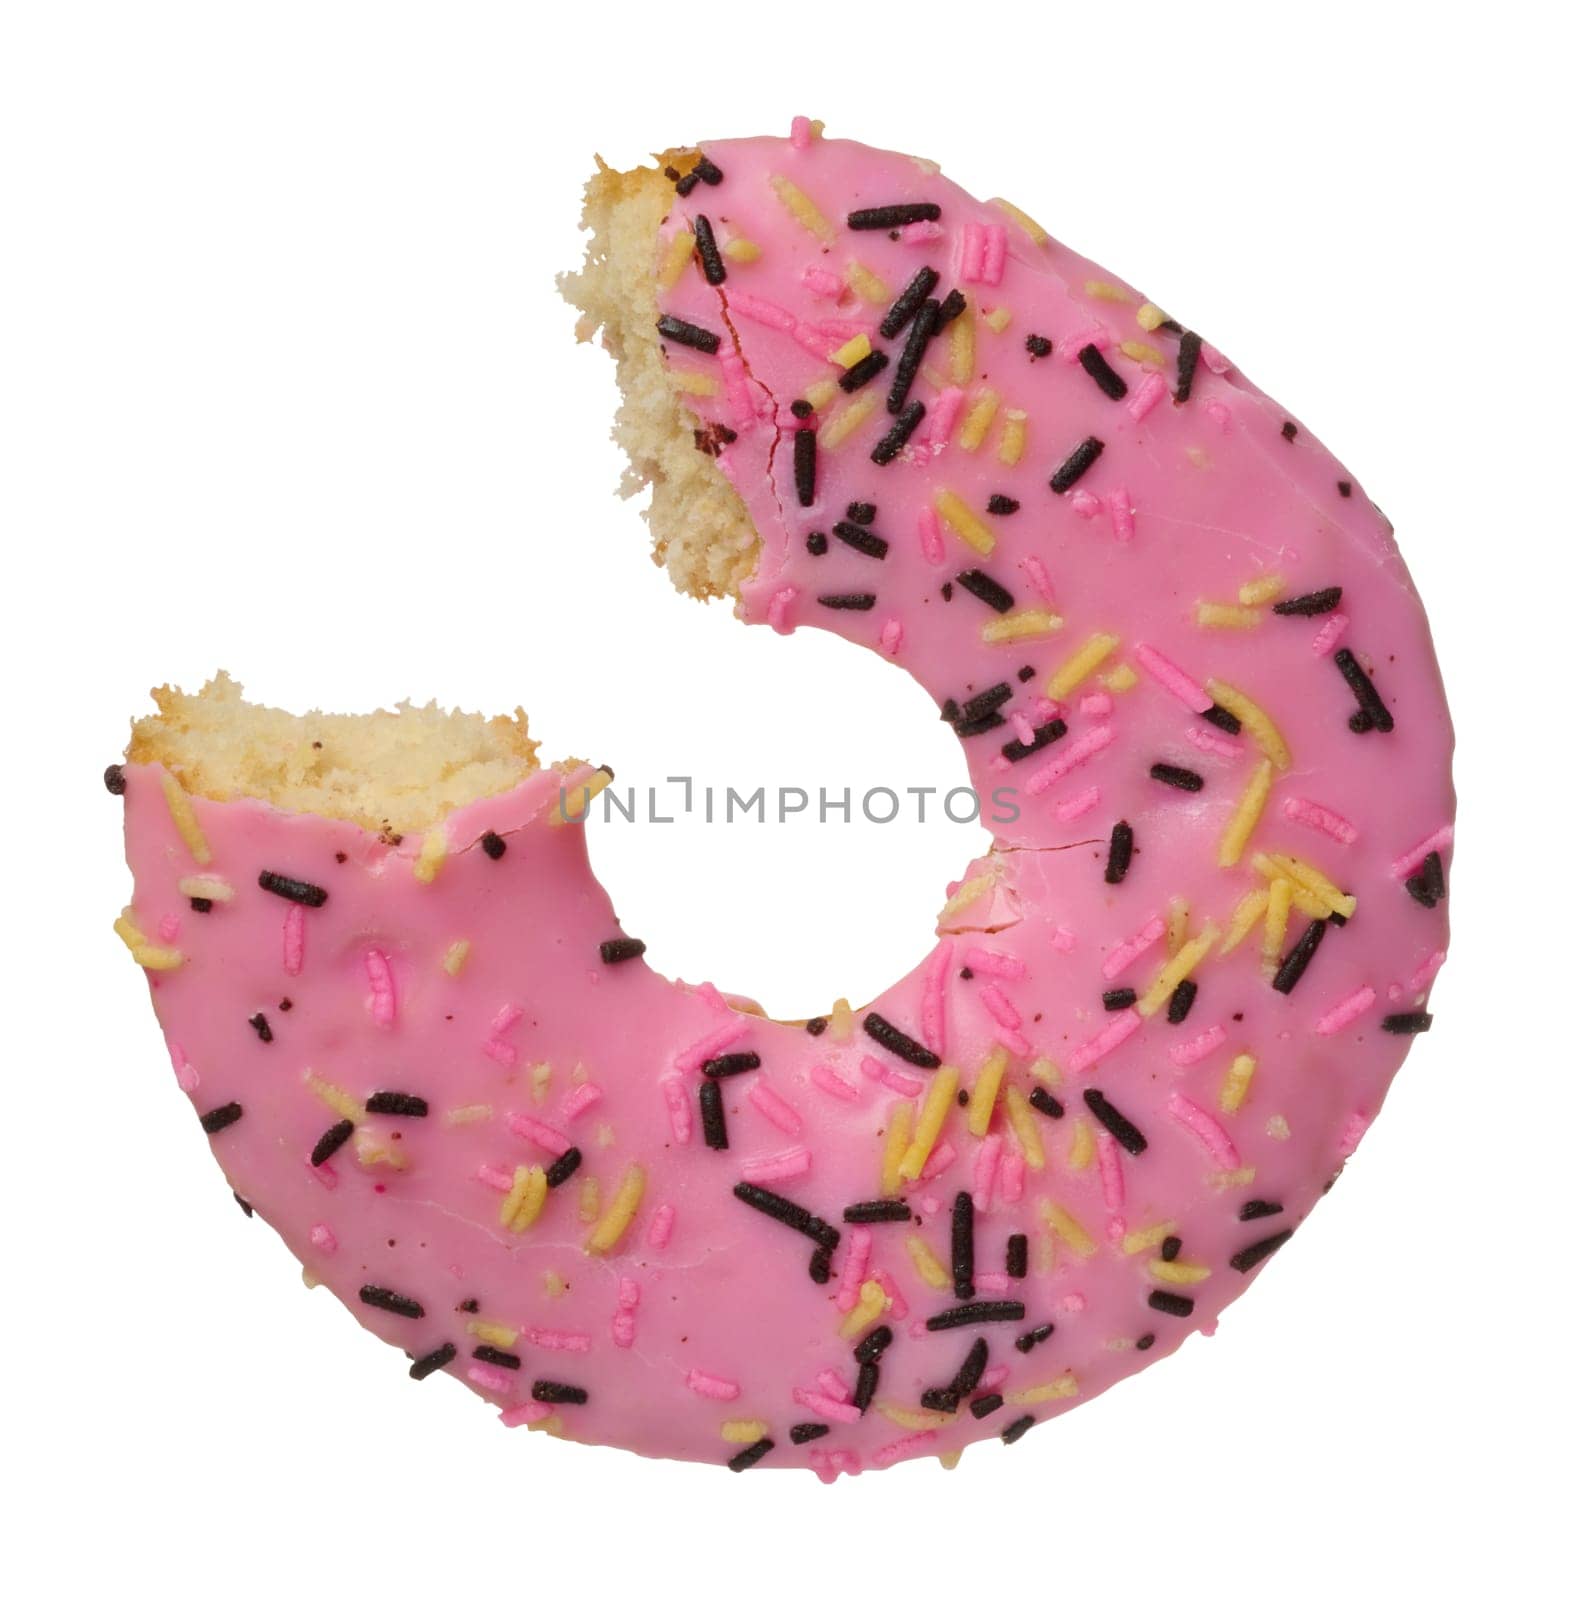 The donut is covered with pink glaze and sprinkled with colorful sprinkles, a piece is taken out. Dessert on isolated background